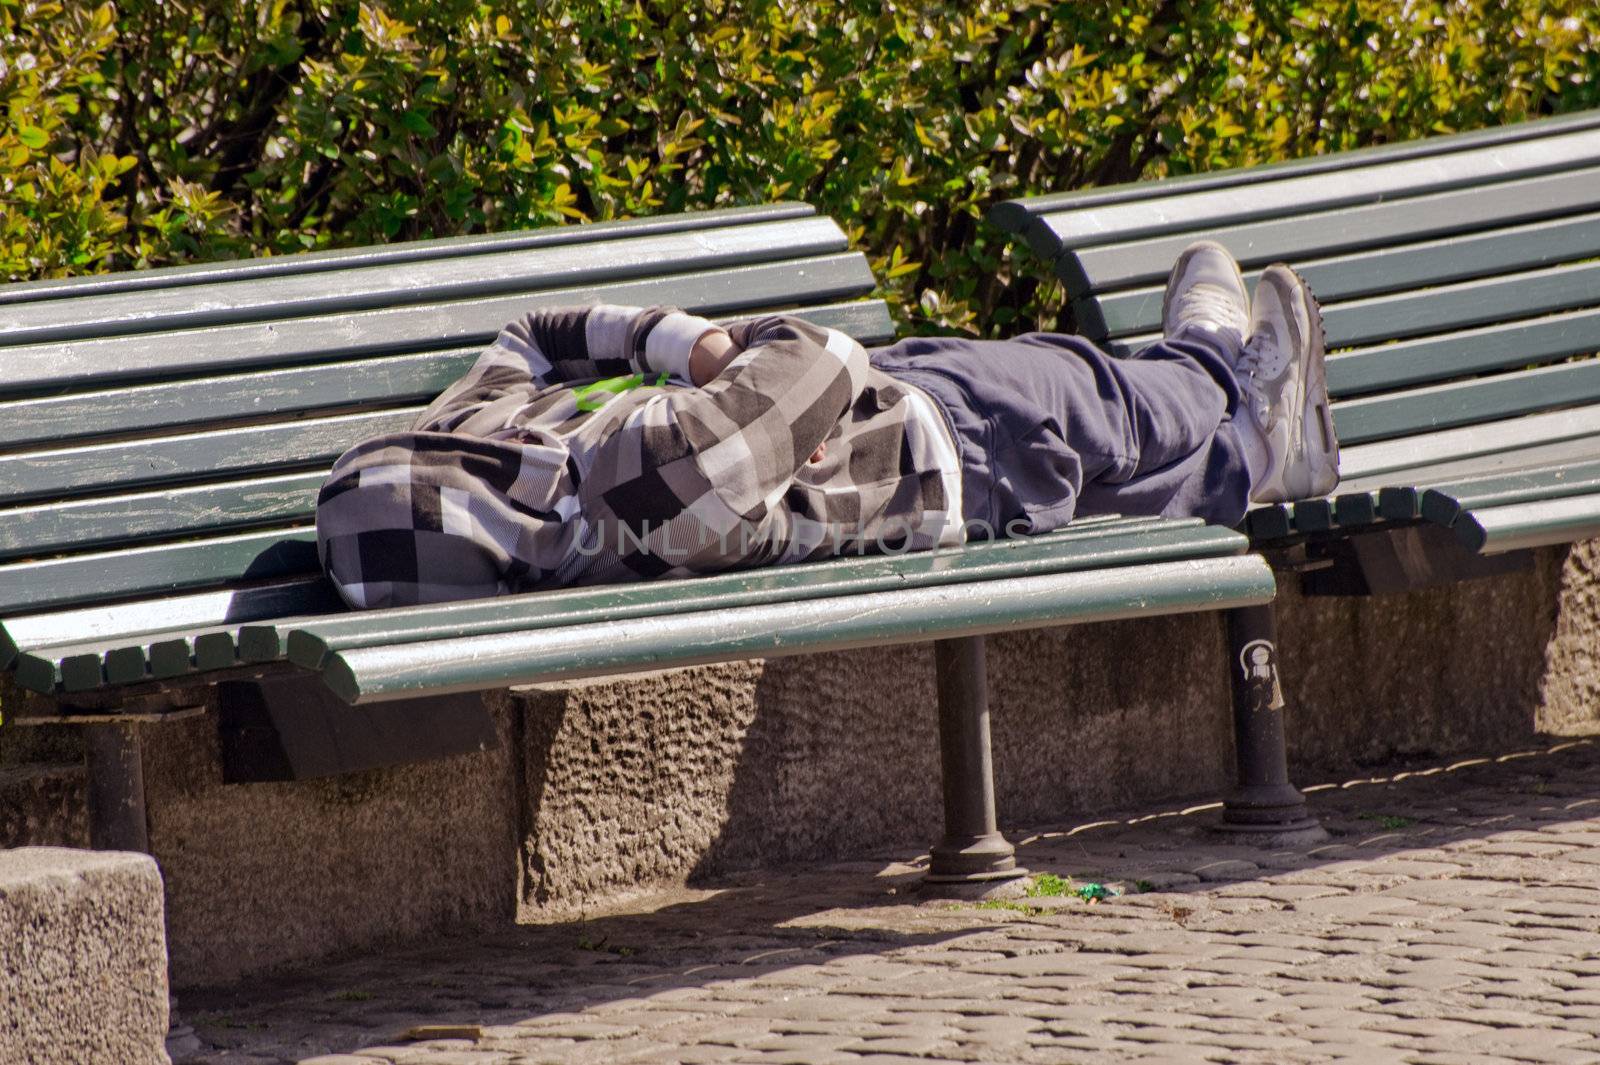  The man sleeps on a bench in city park